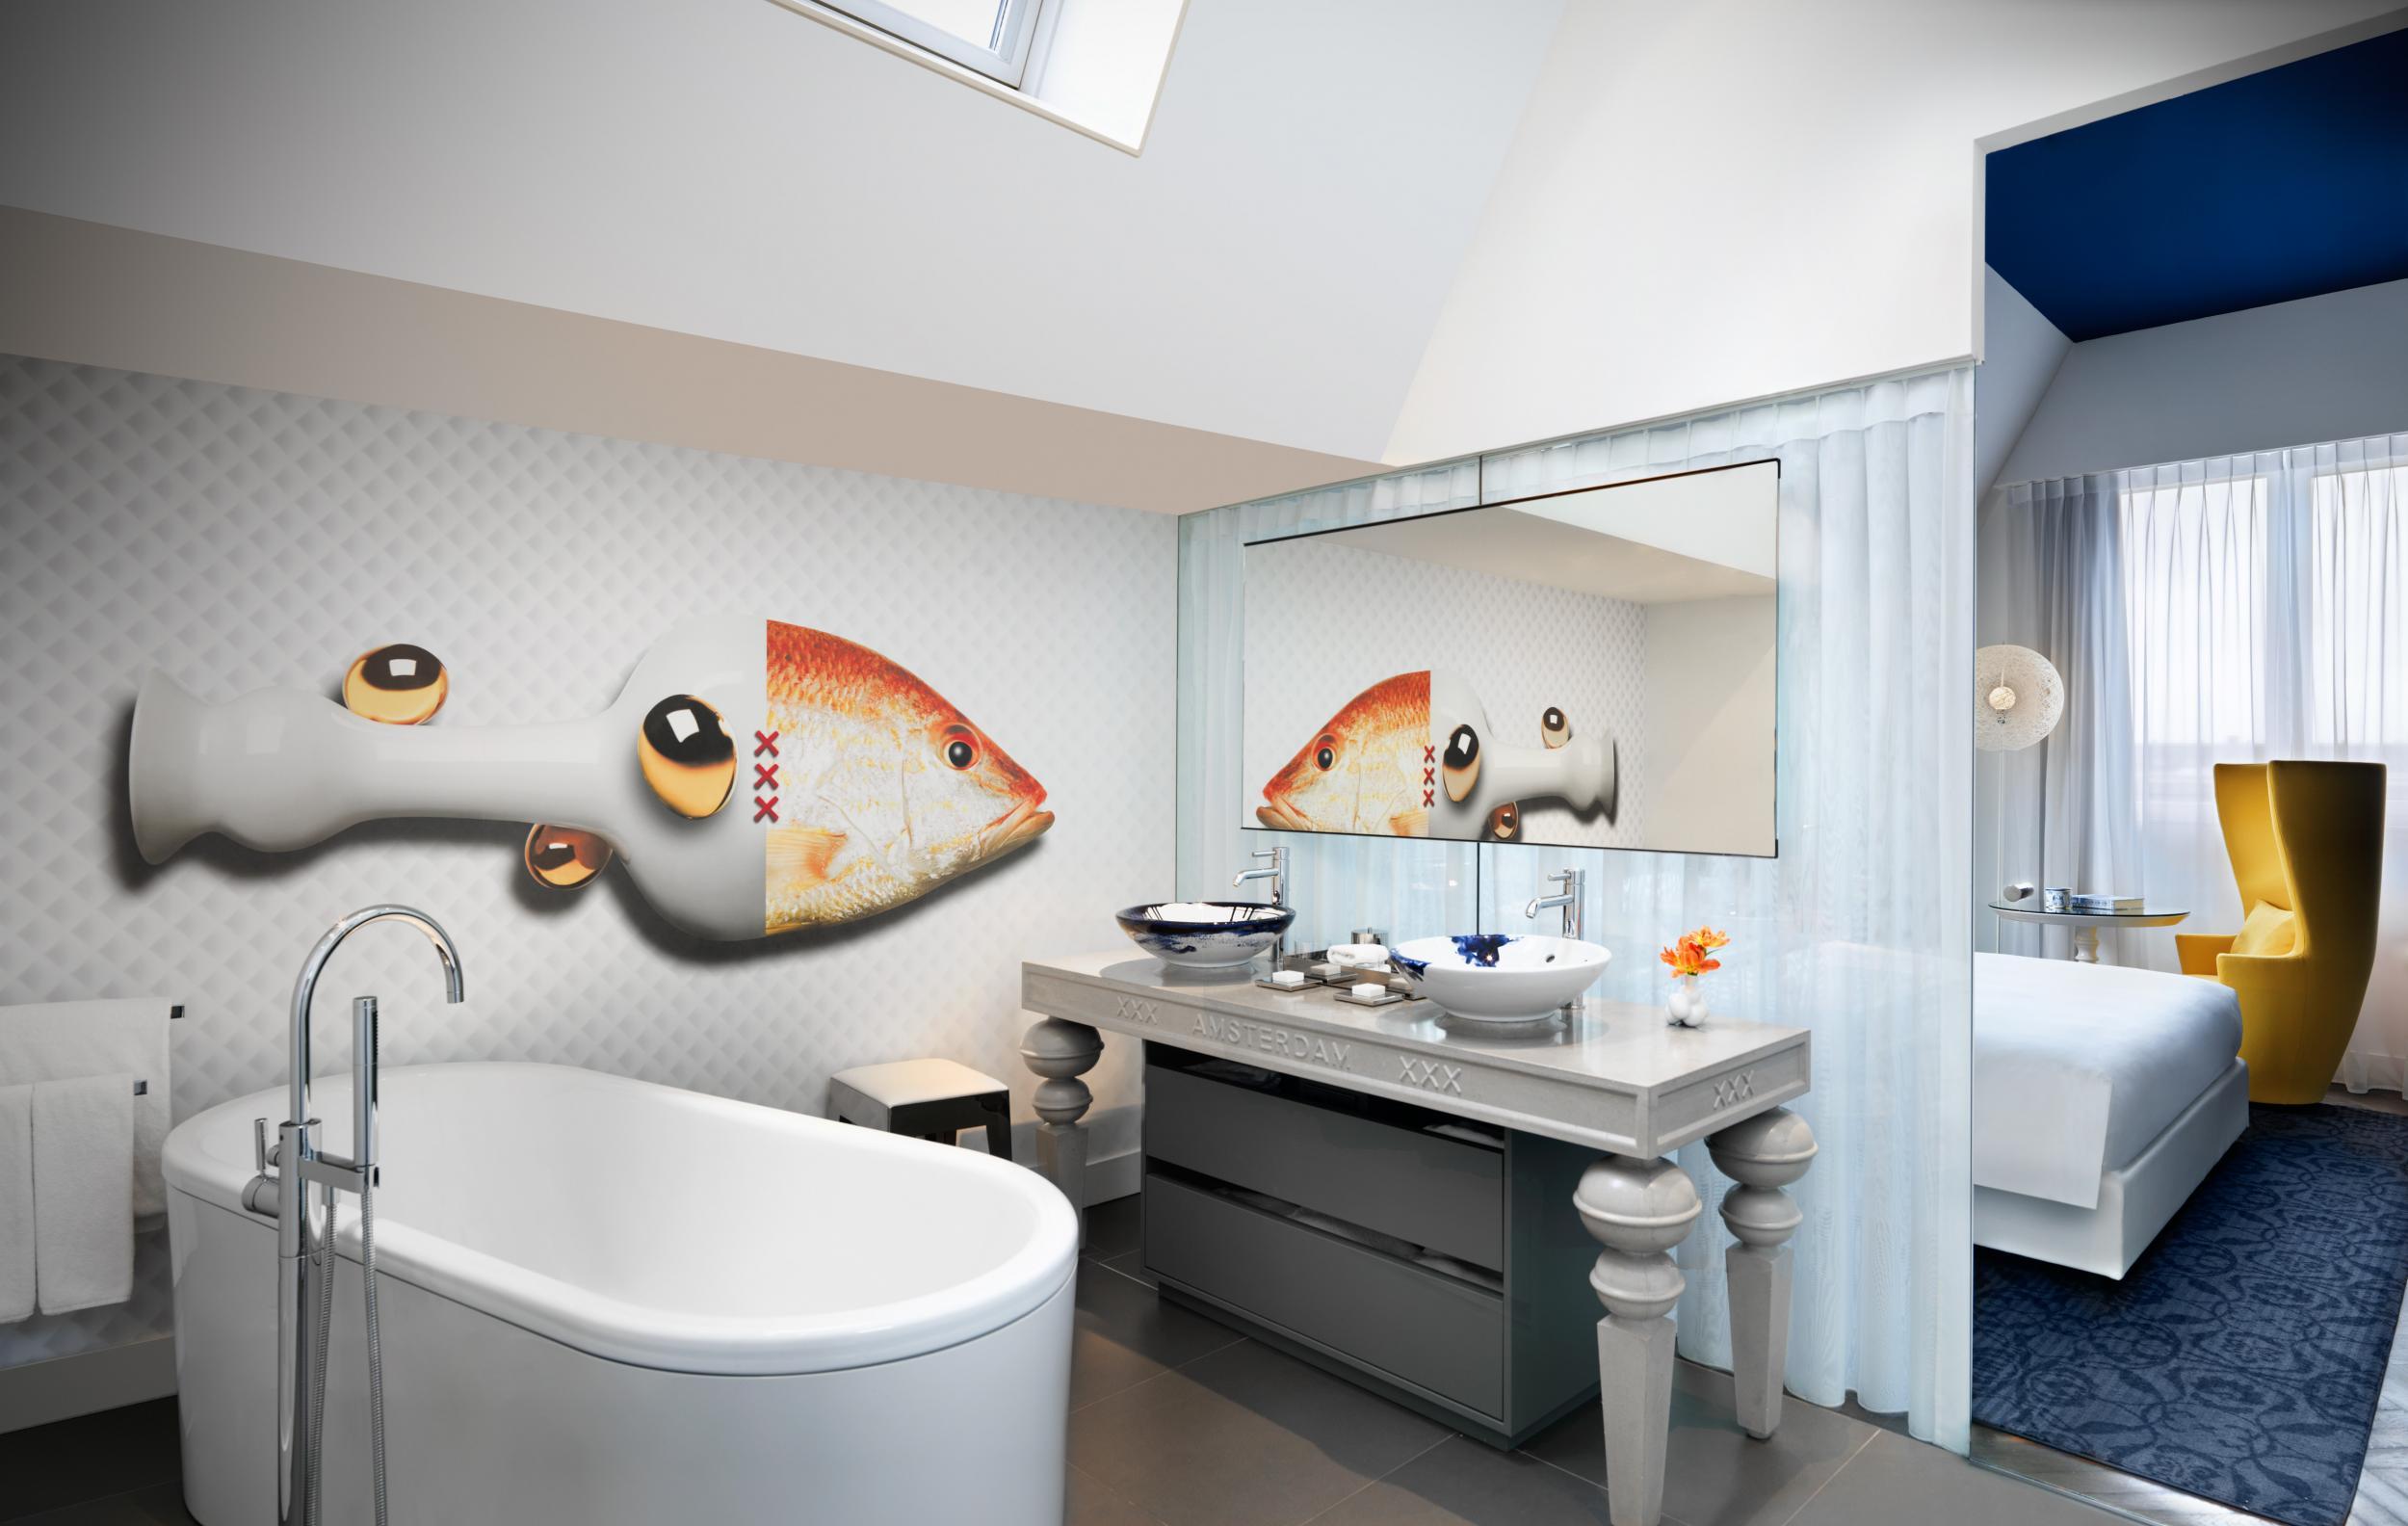 The interiors at Andaz Amsterdam are designed by Marcel Wanders